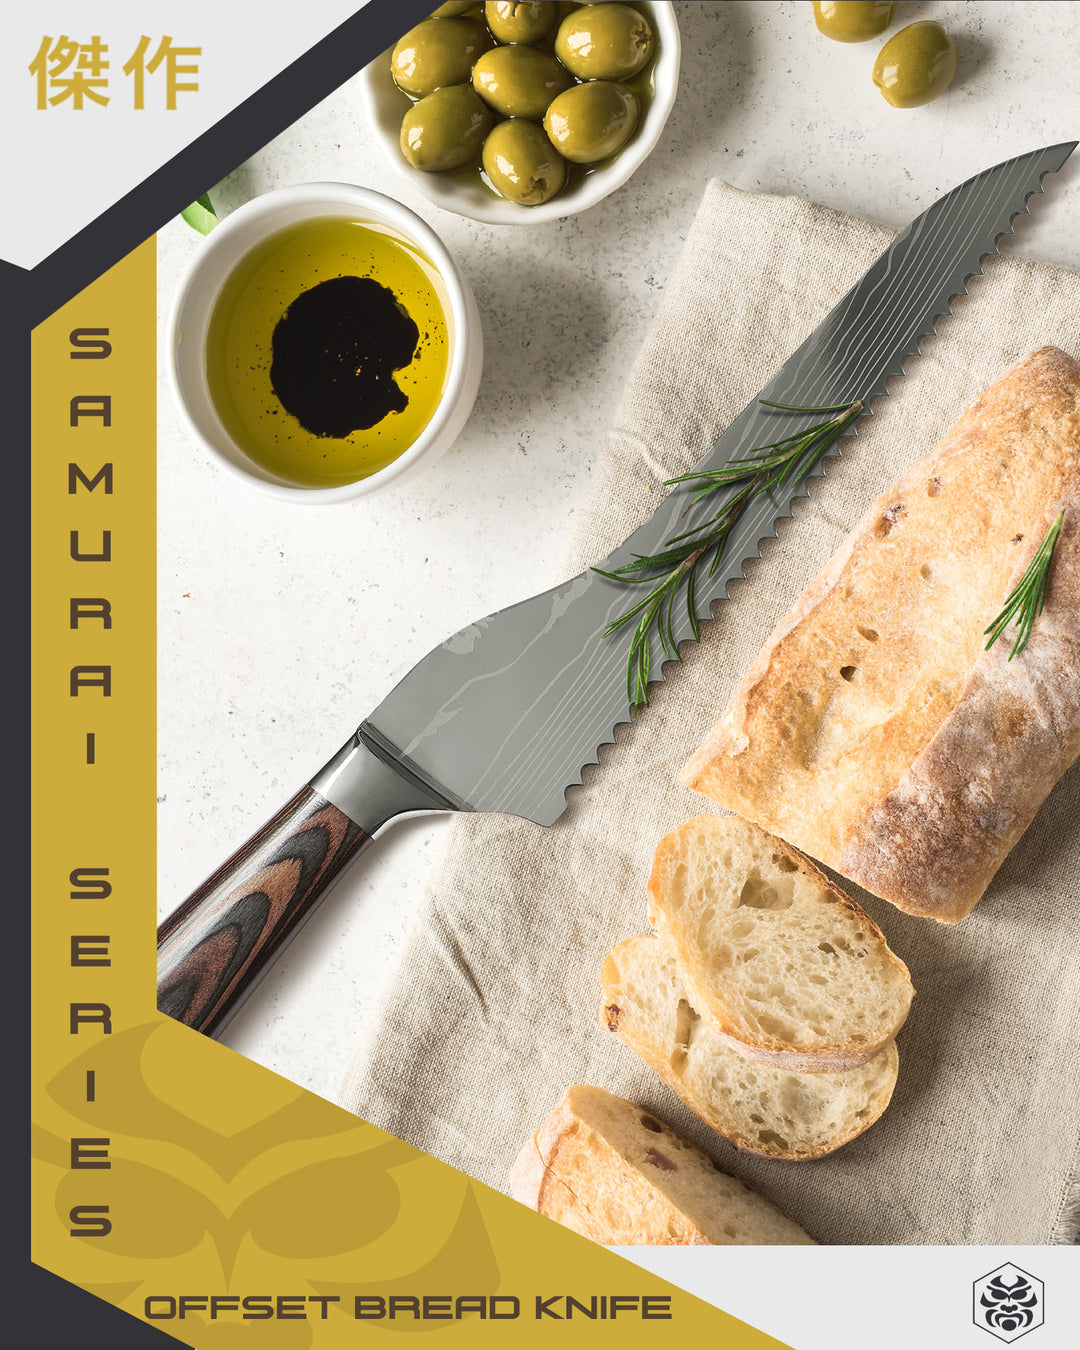 The Samurai Offset Deli Knife used to slice a loaf of bread. Olvies, drawn butter and rosemary compliment the scene